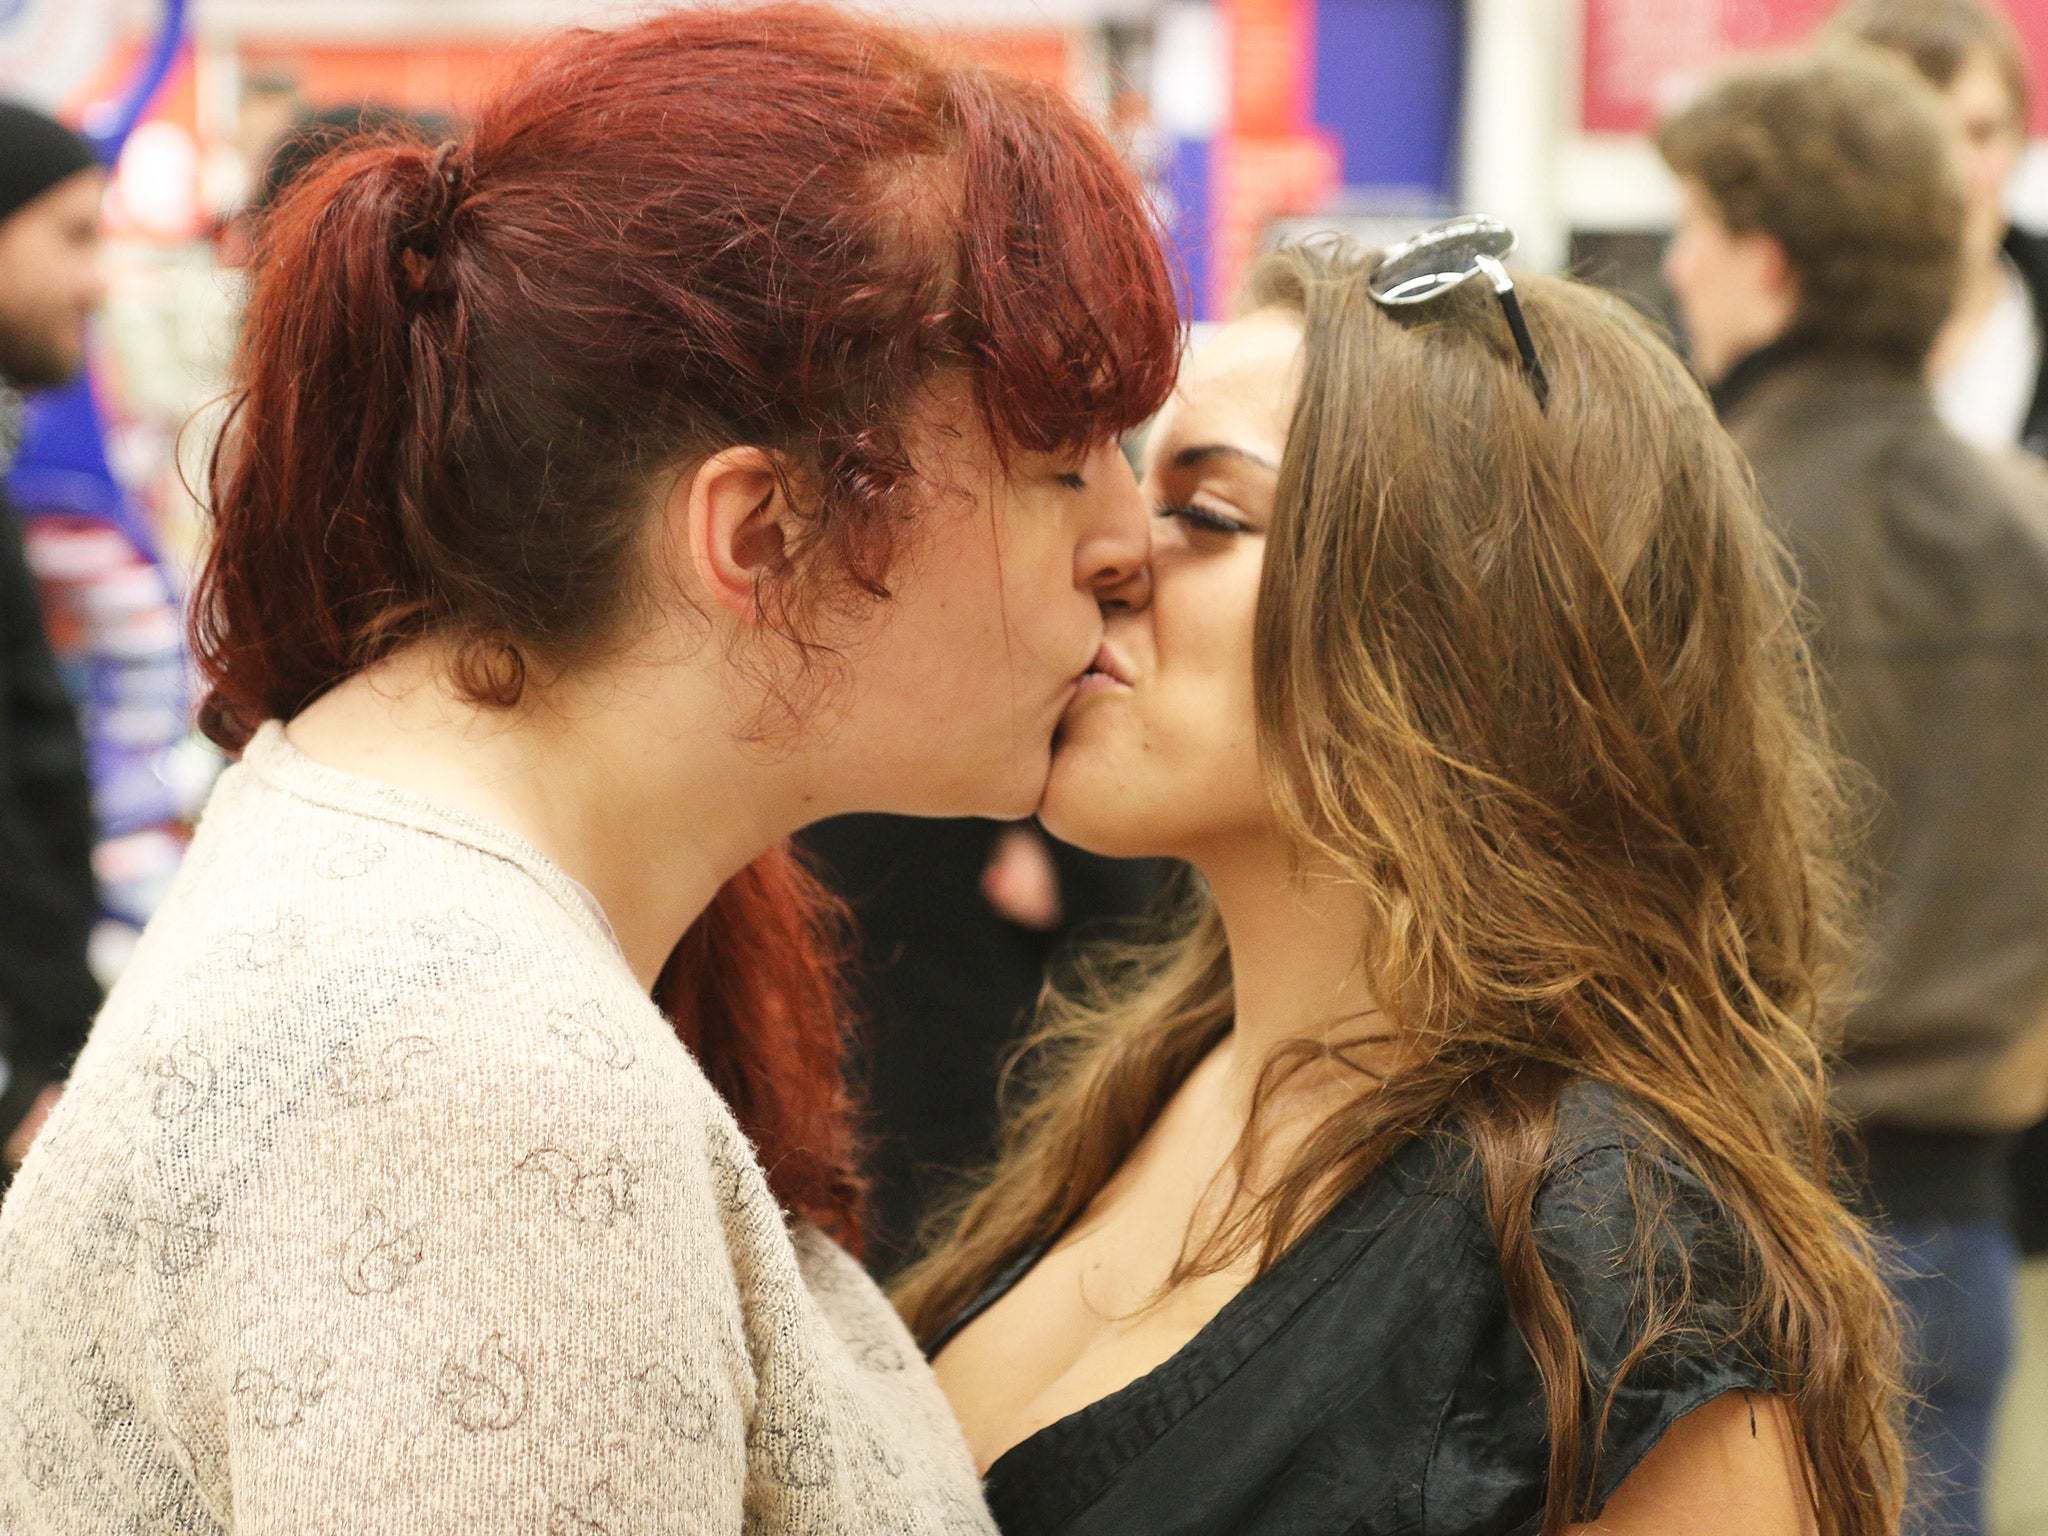 lesbian dating apps 2014